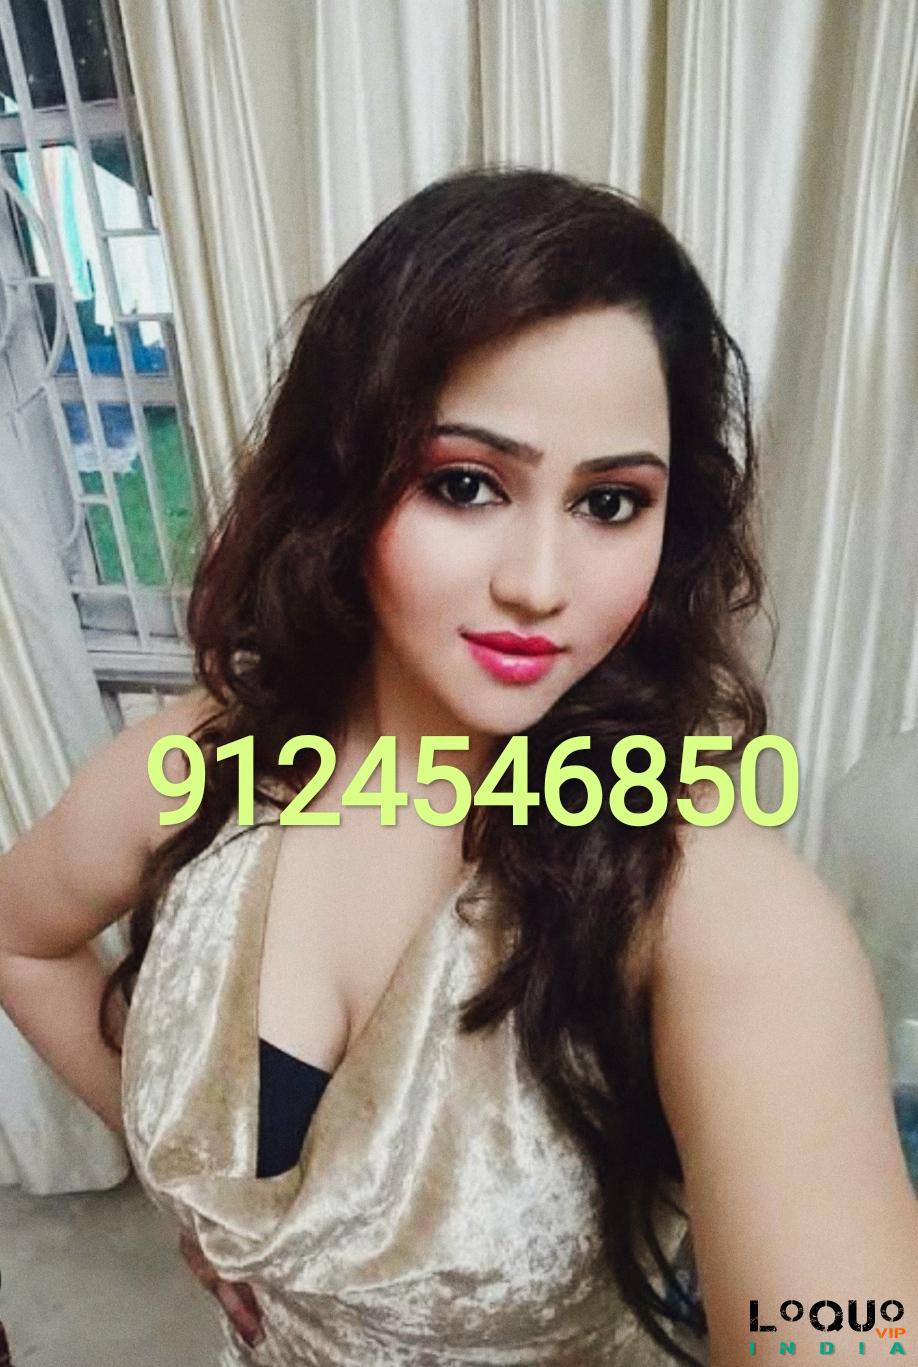 Call Girls Kerala: VIDEO_CALL_SERVICES TRUSTED_GENUINE_GIRL_kallur_LOW_PRICE